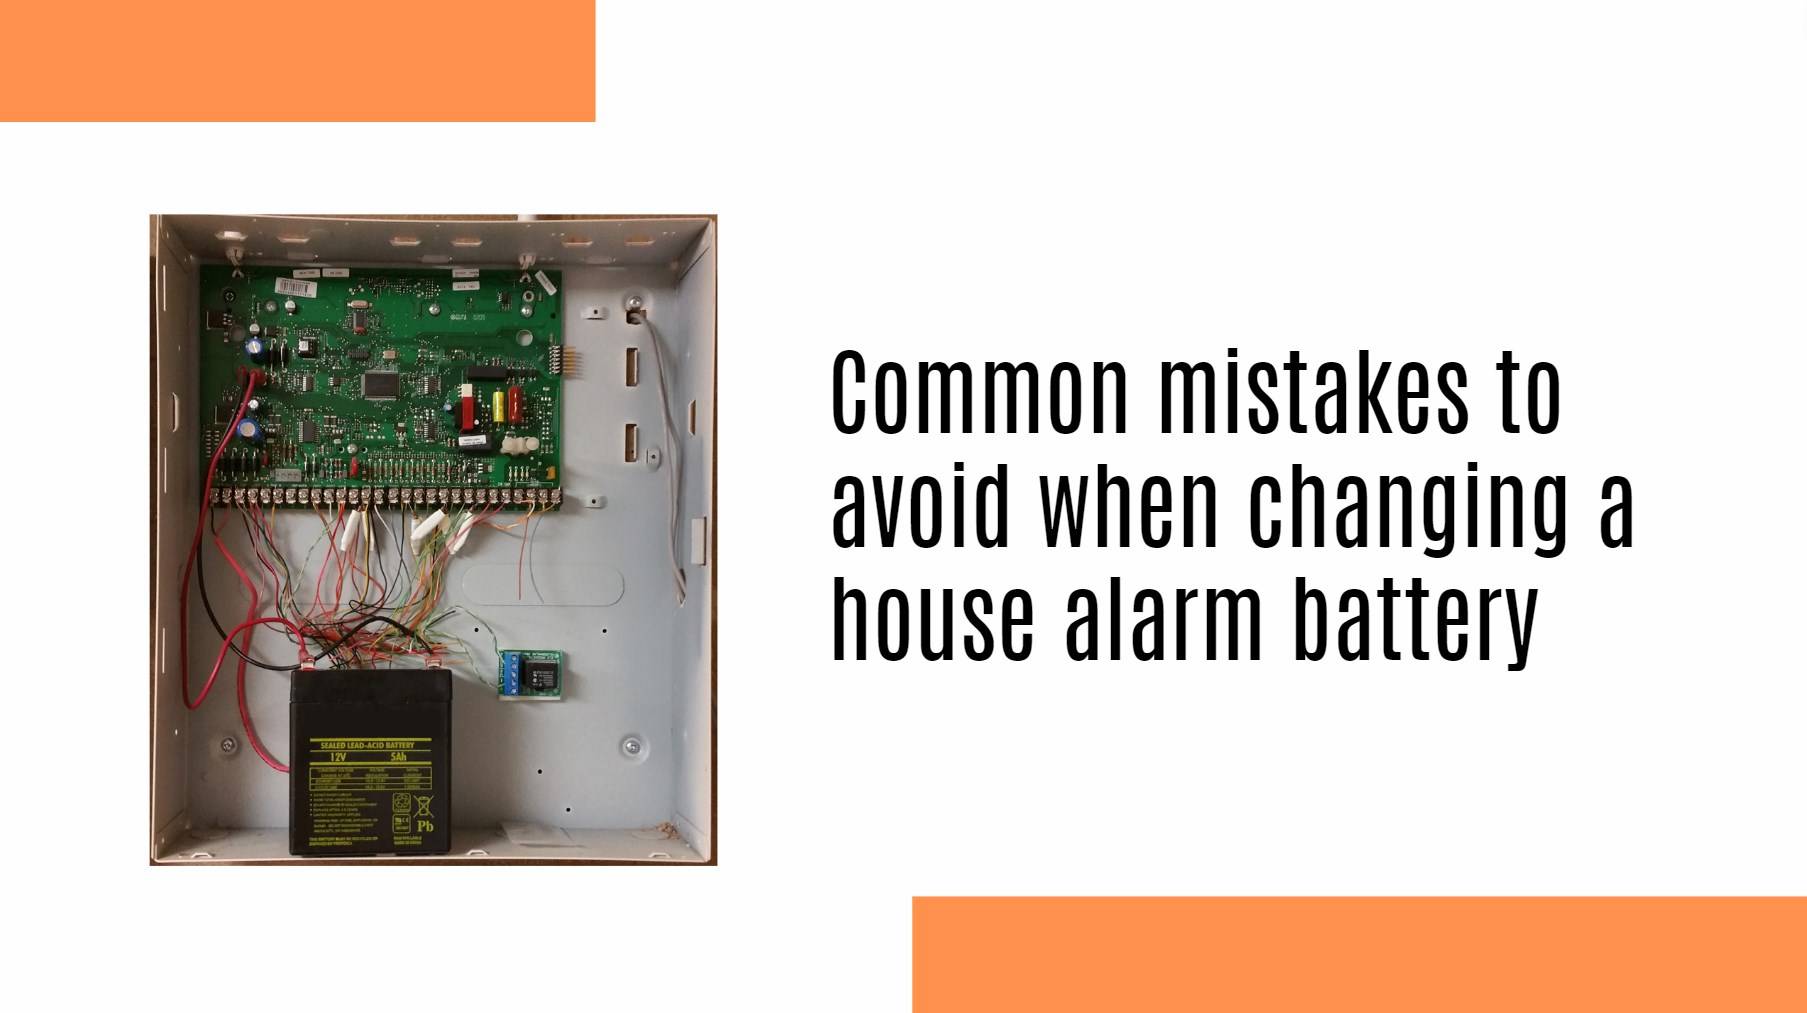 Common mistakes to avoid when changing a house alarm battery